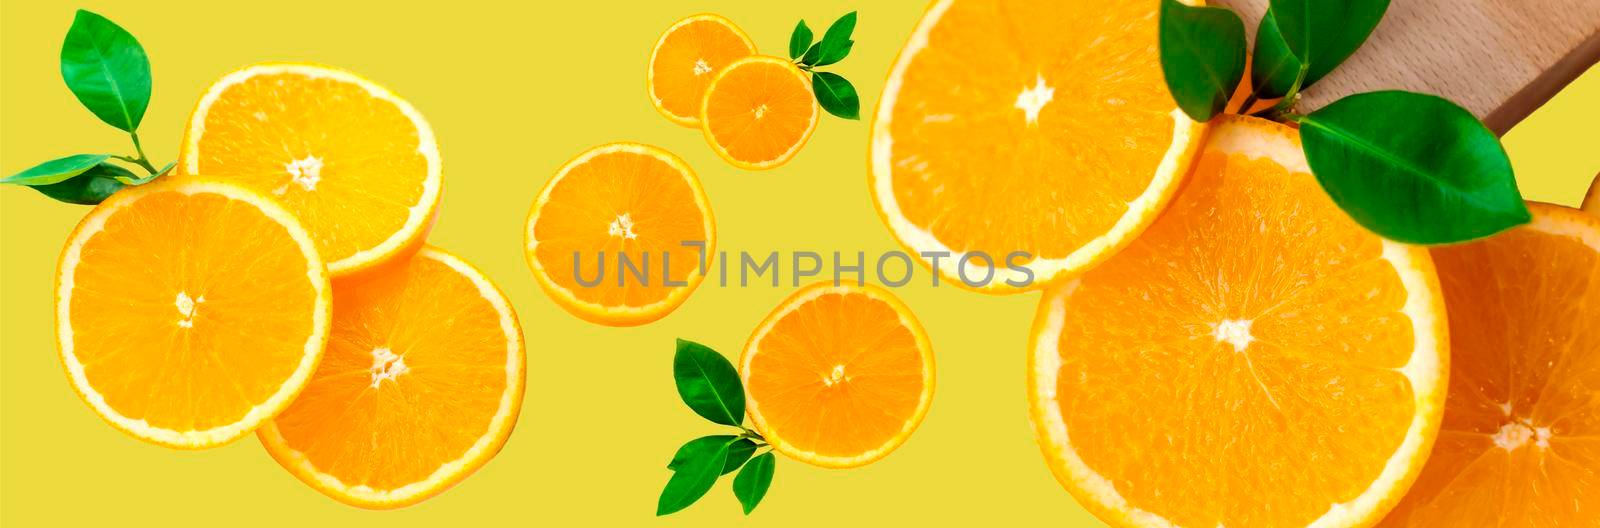 Sliced orange on a bright orange background. Oranges in the panoramic image. Panorama, a banner with space for text or insertion. Pieces of citrus fruit.  by Alina_Lebed